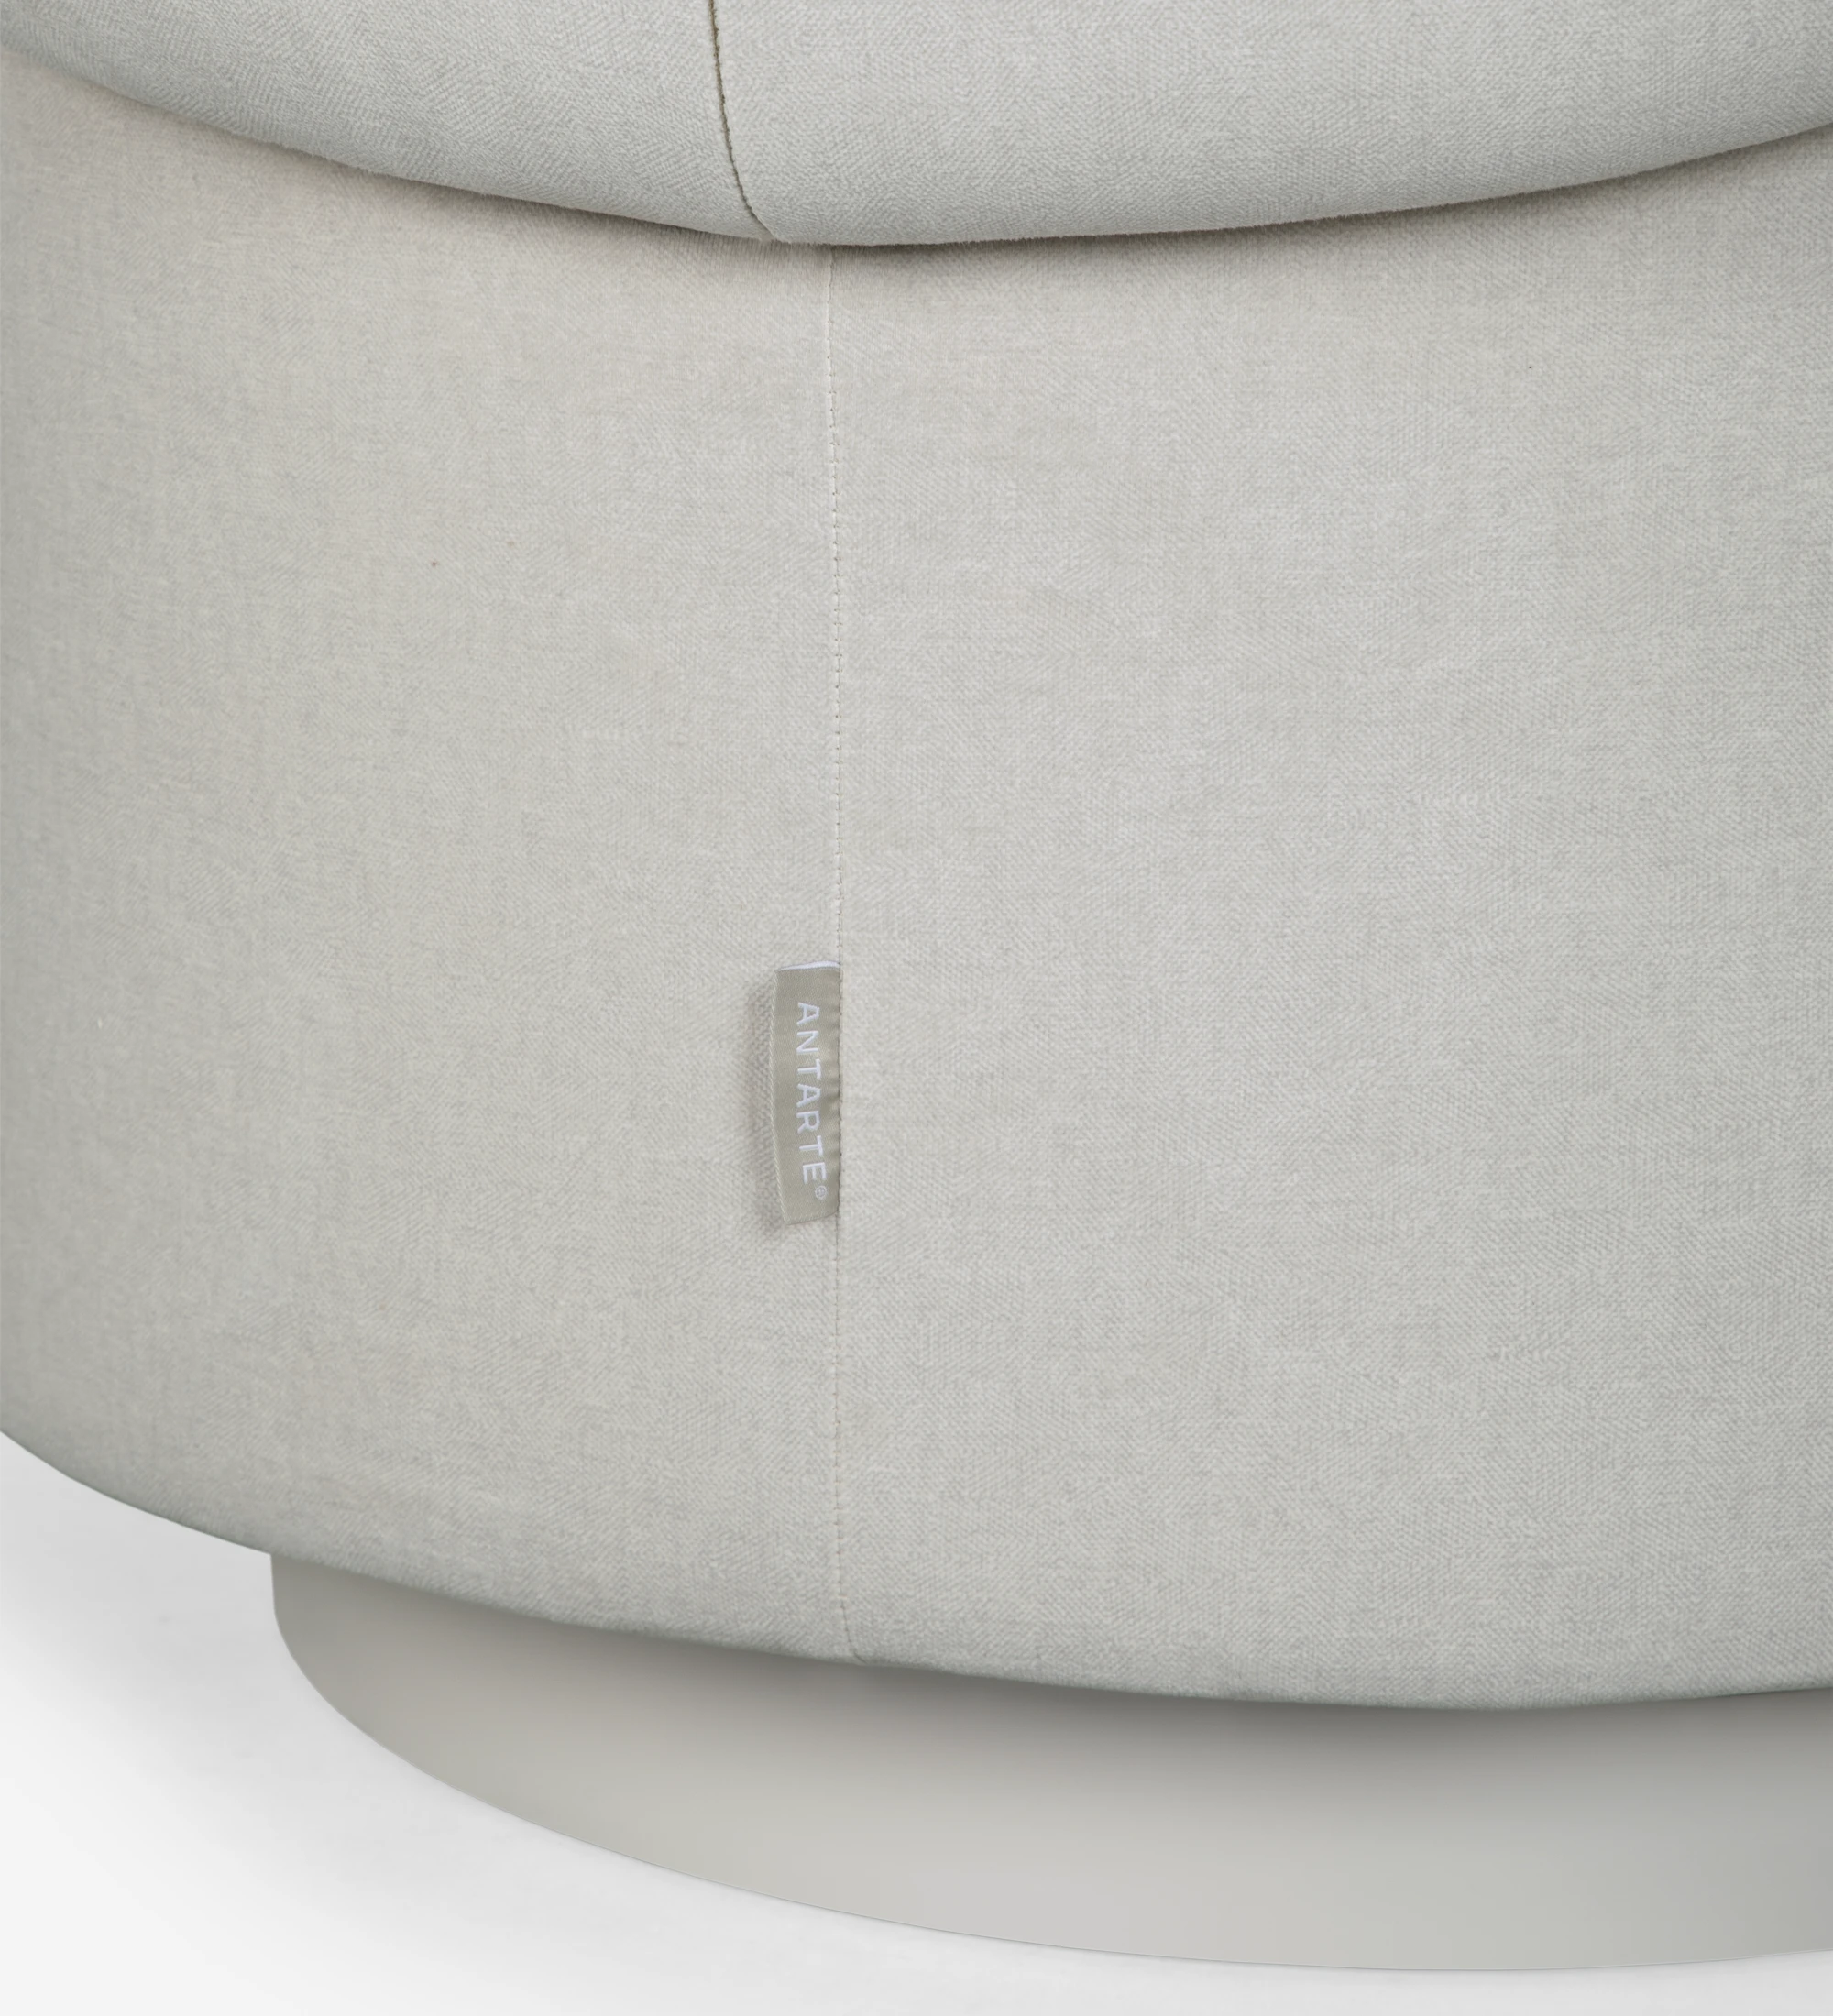 Londres swivel armchair, upholstered in light gray fabric, pearl lacquered baseboard.